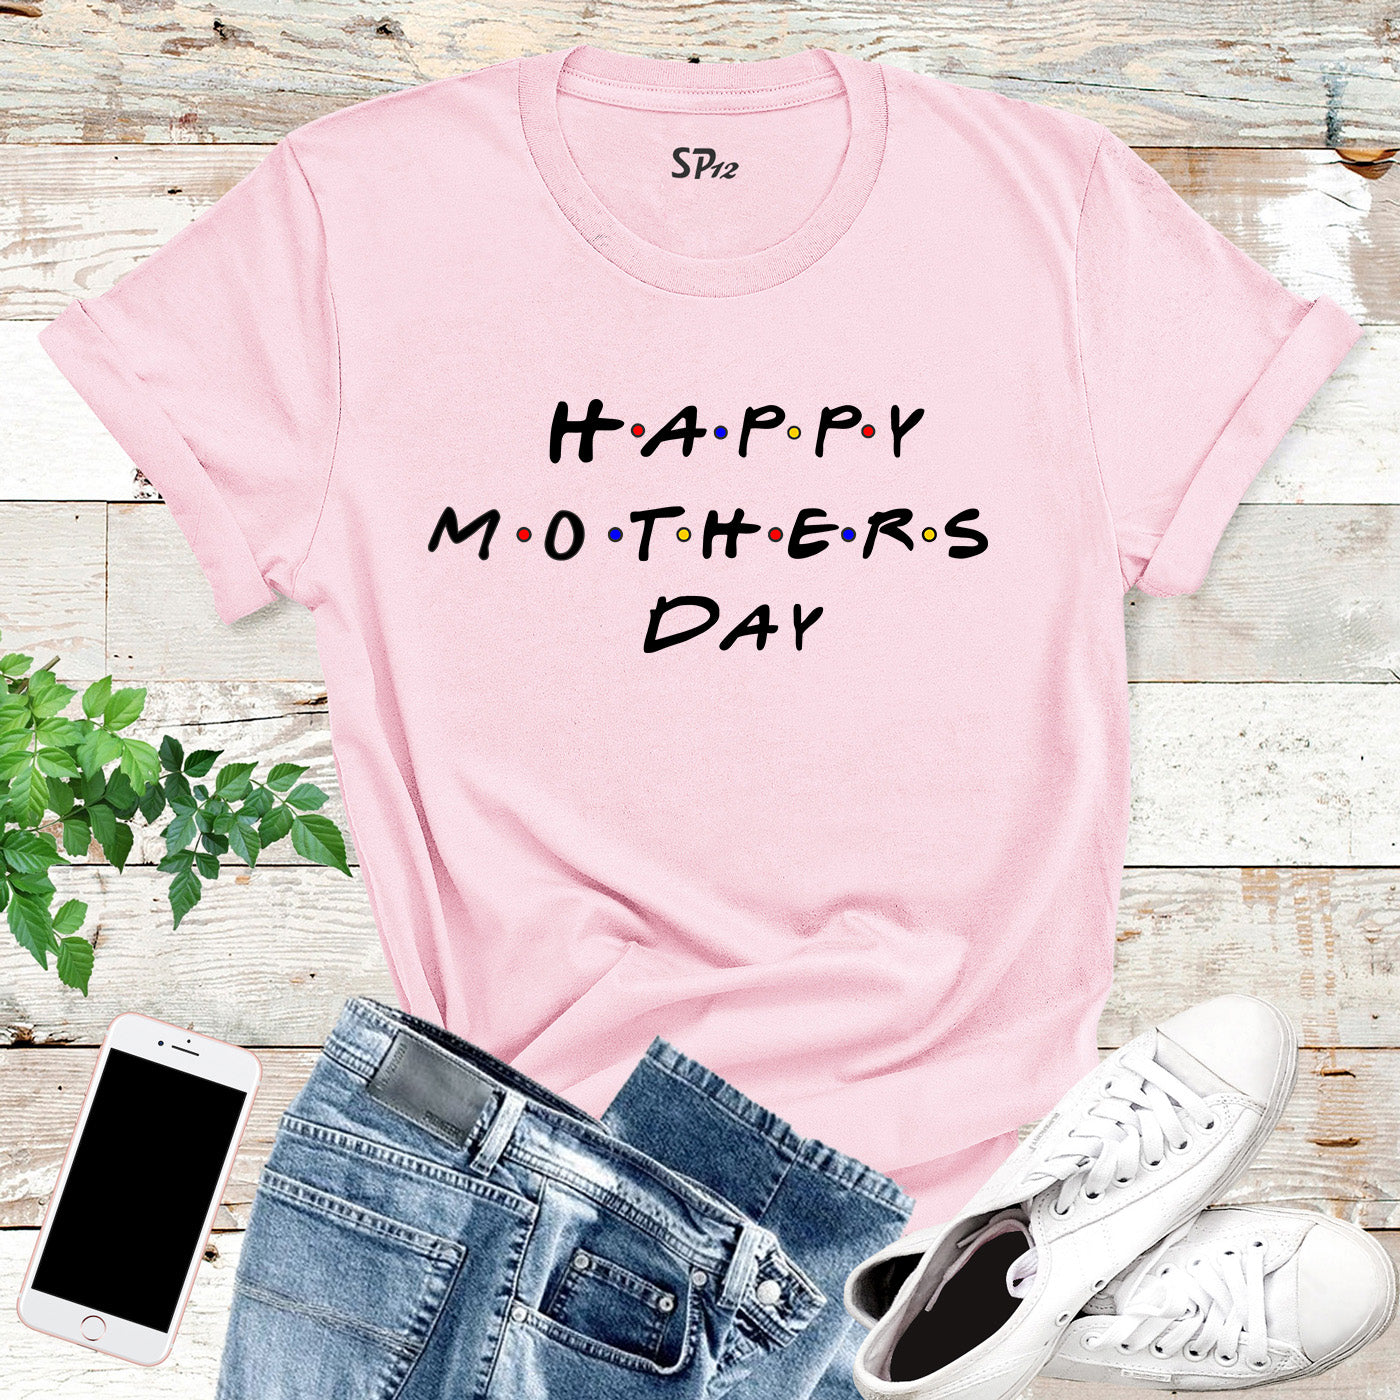 Happy Mothers Day T Shirt